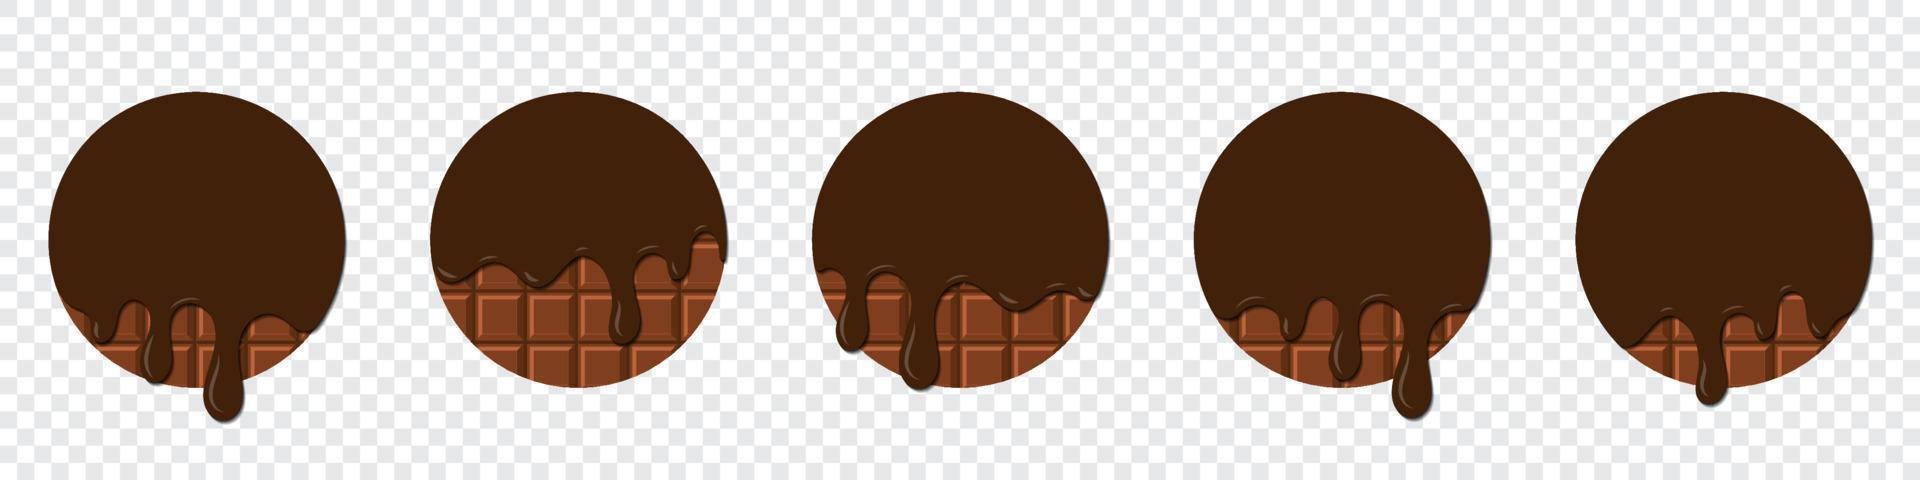 Set of chocolate drops. Dripping melted chocolate. Realistic melted chocolate. Chocolate drops. Melting Chocolate. Brown liquid dessert, sweet drip melt. Vector illustration